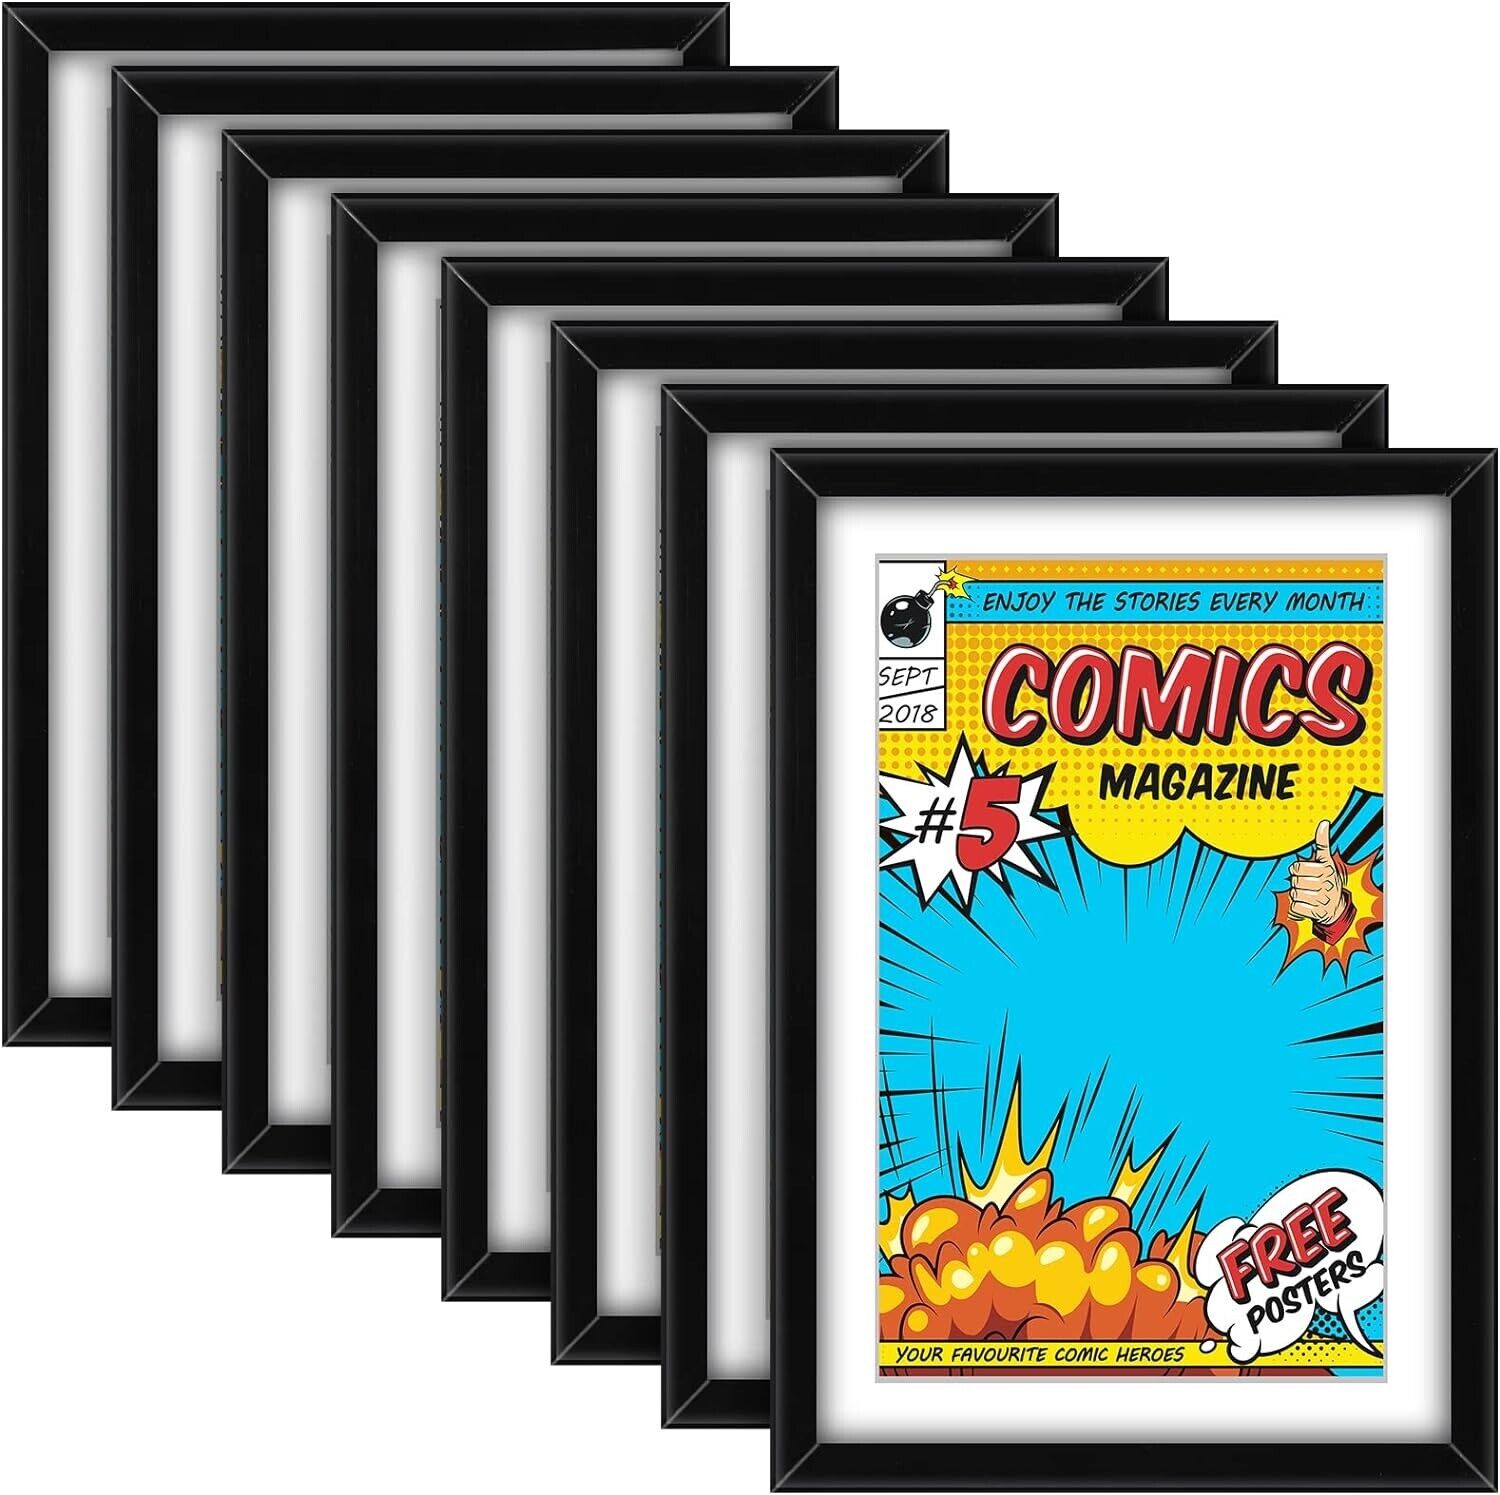 Geetery 8 Pack Comic Book Frame Comic Book Wall Display Mounted Storage Picture